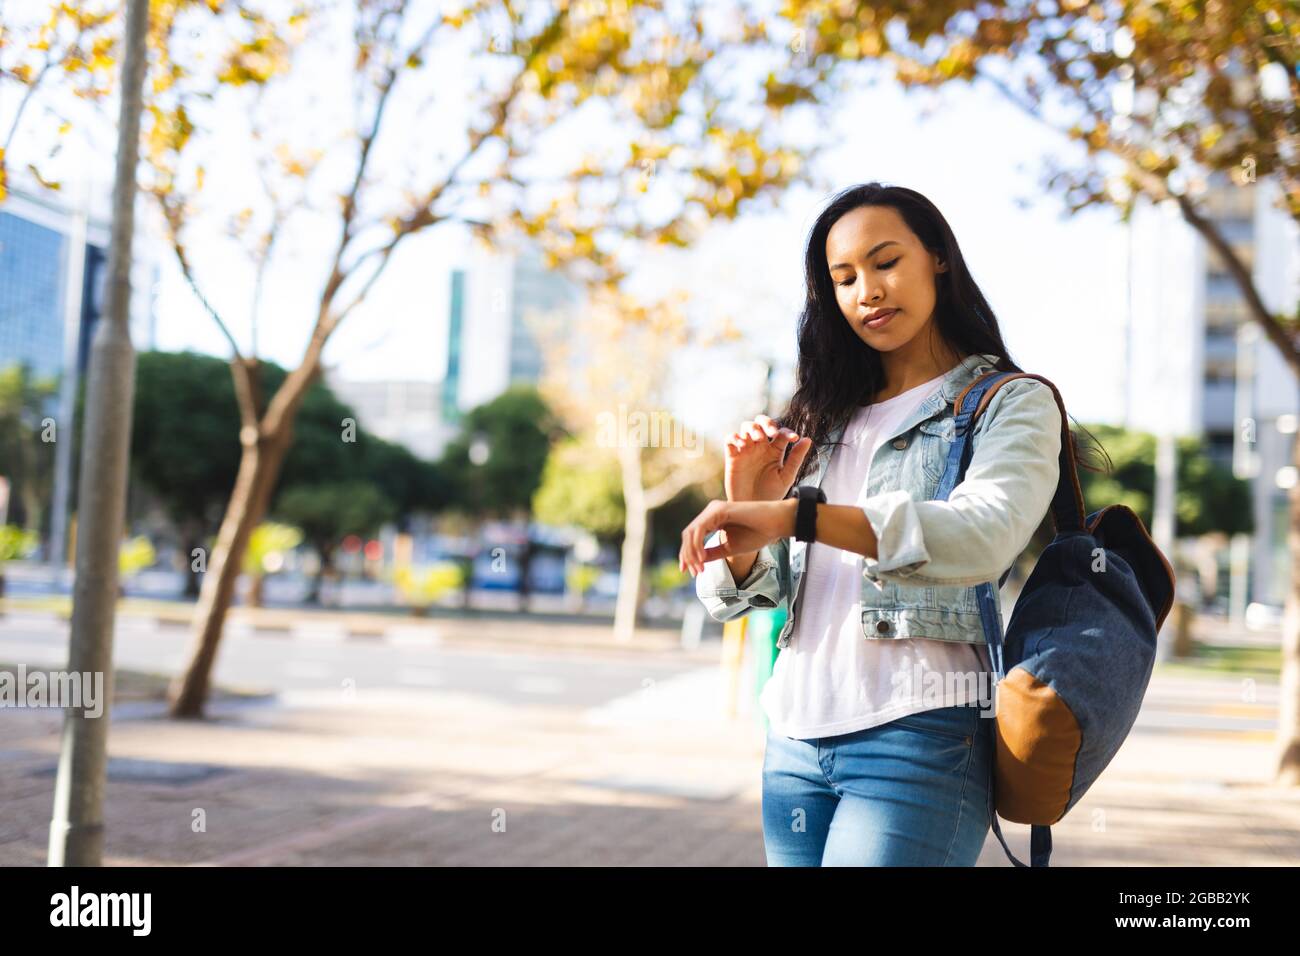 Asian woman checking her smartwatch in sunny park Stock Photo